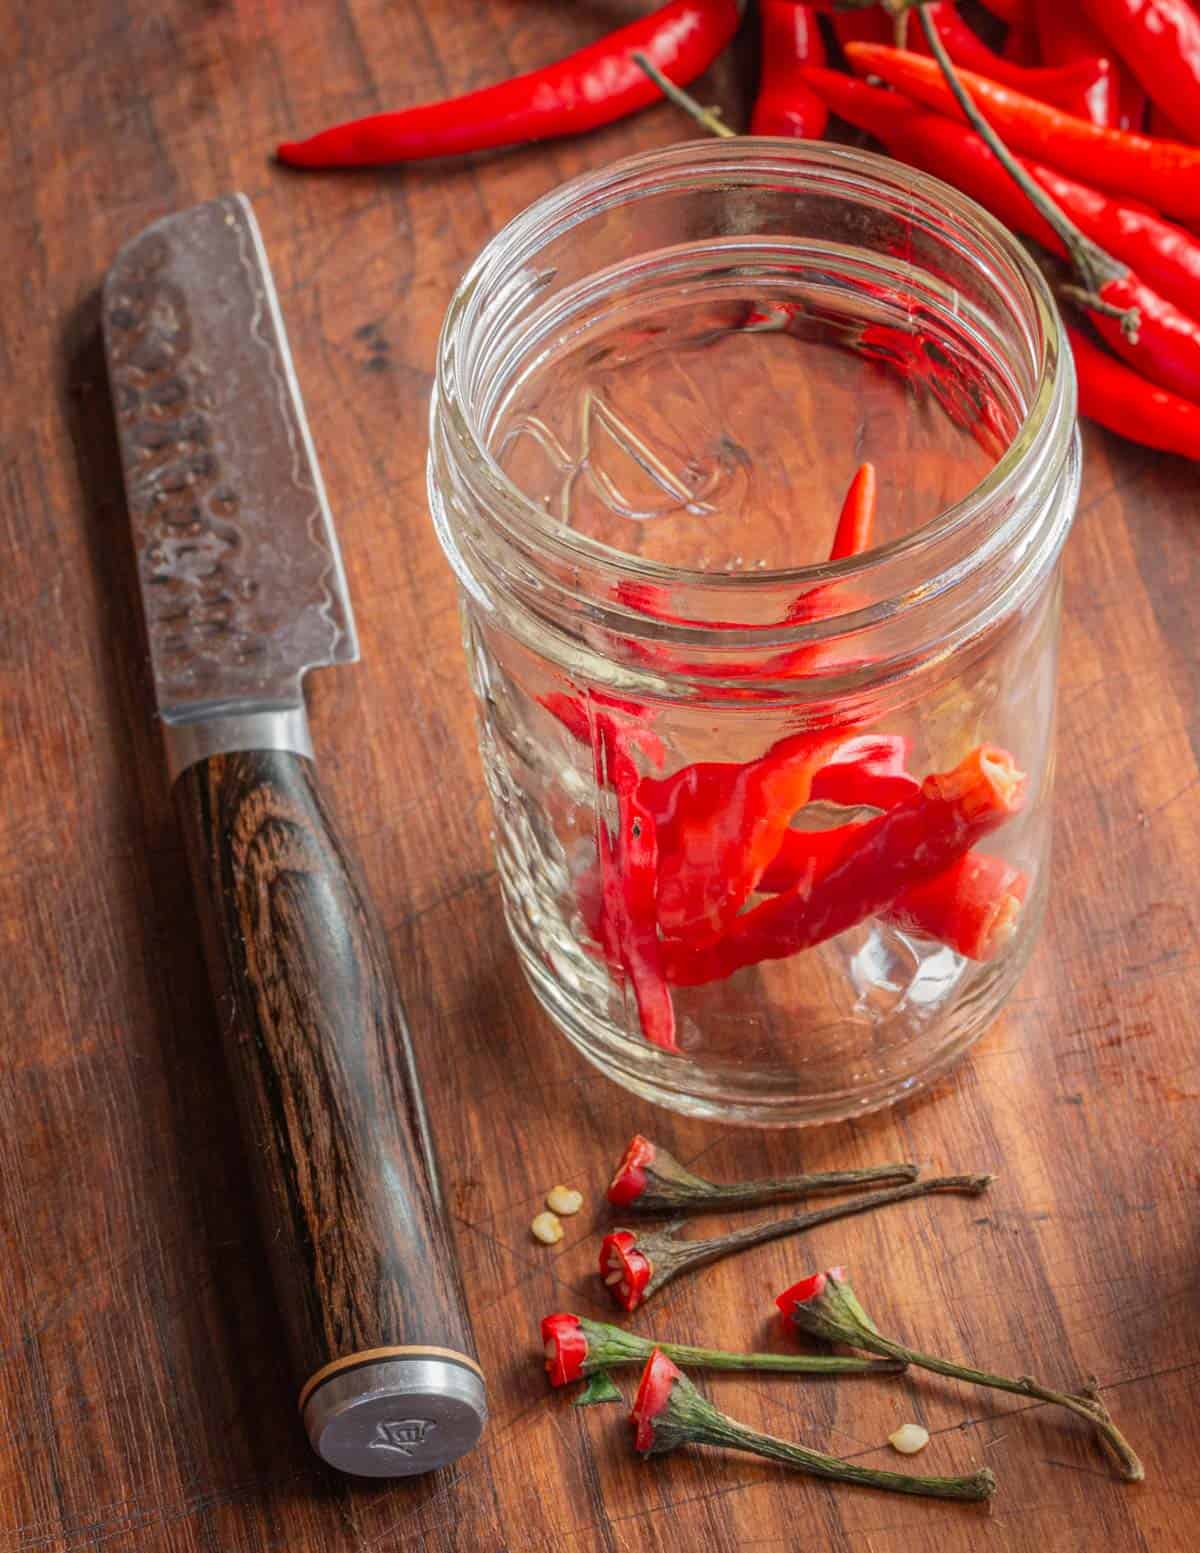 Cutting the stems from hot peppers and putting them in a jar. 